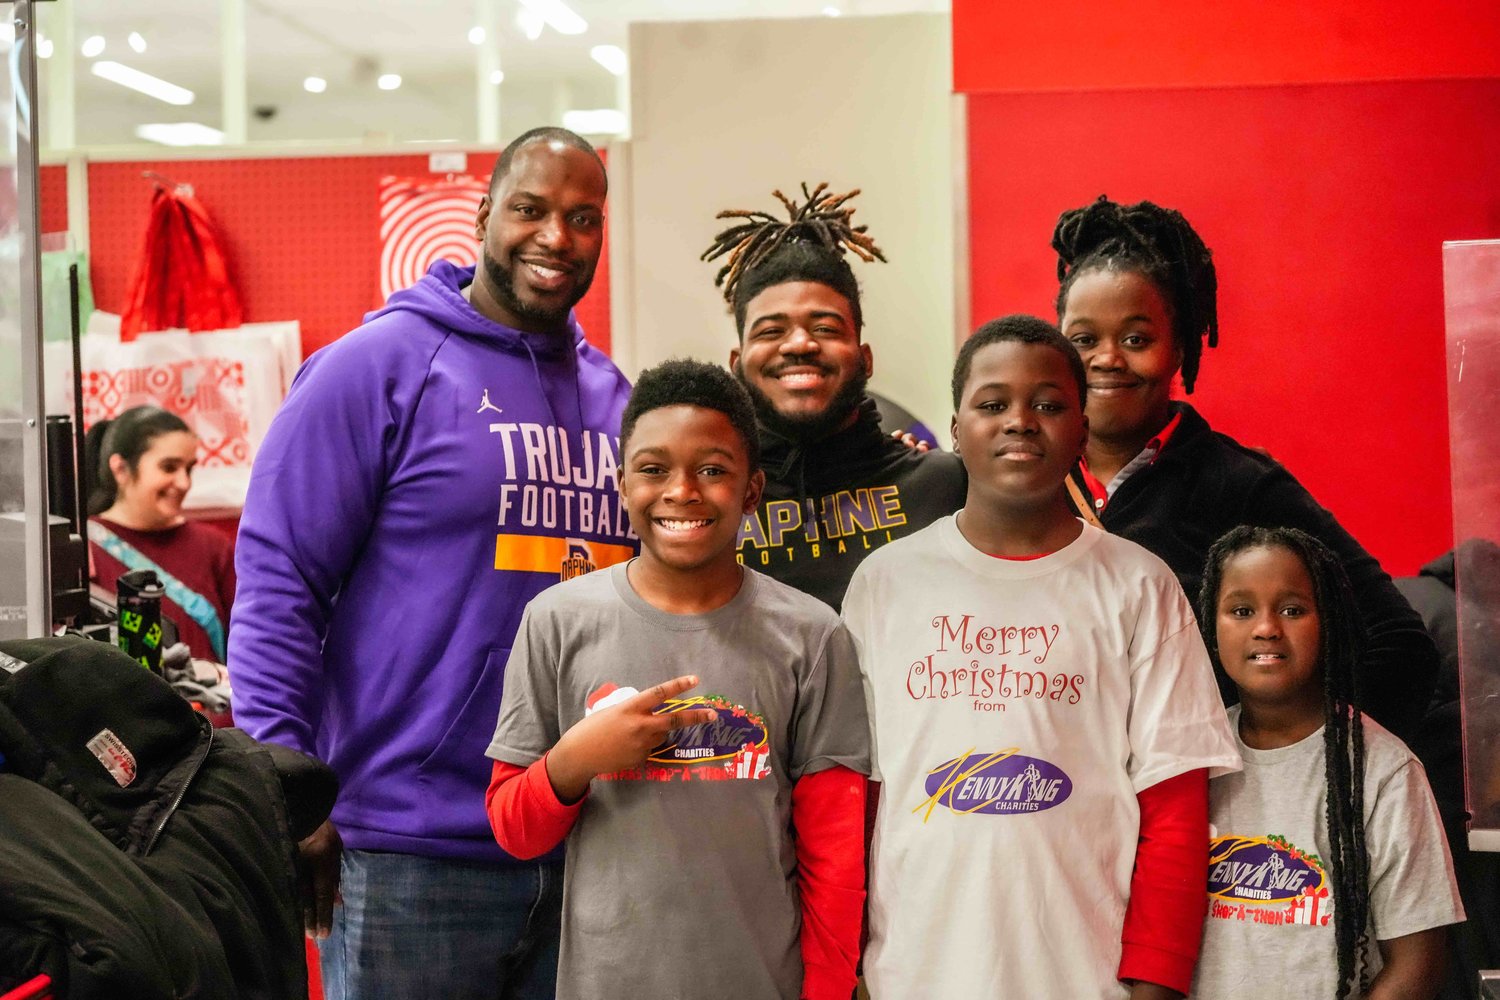 Kenny King Charities hosted its ninth annual Shop-A-Thon at Target Friday, Dec. 23, where children were partnered with their favorite Daphne Trojans football players to fulfill Christmas wishes.